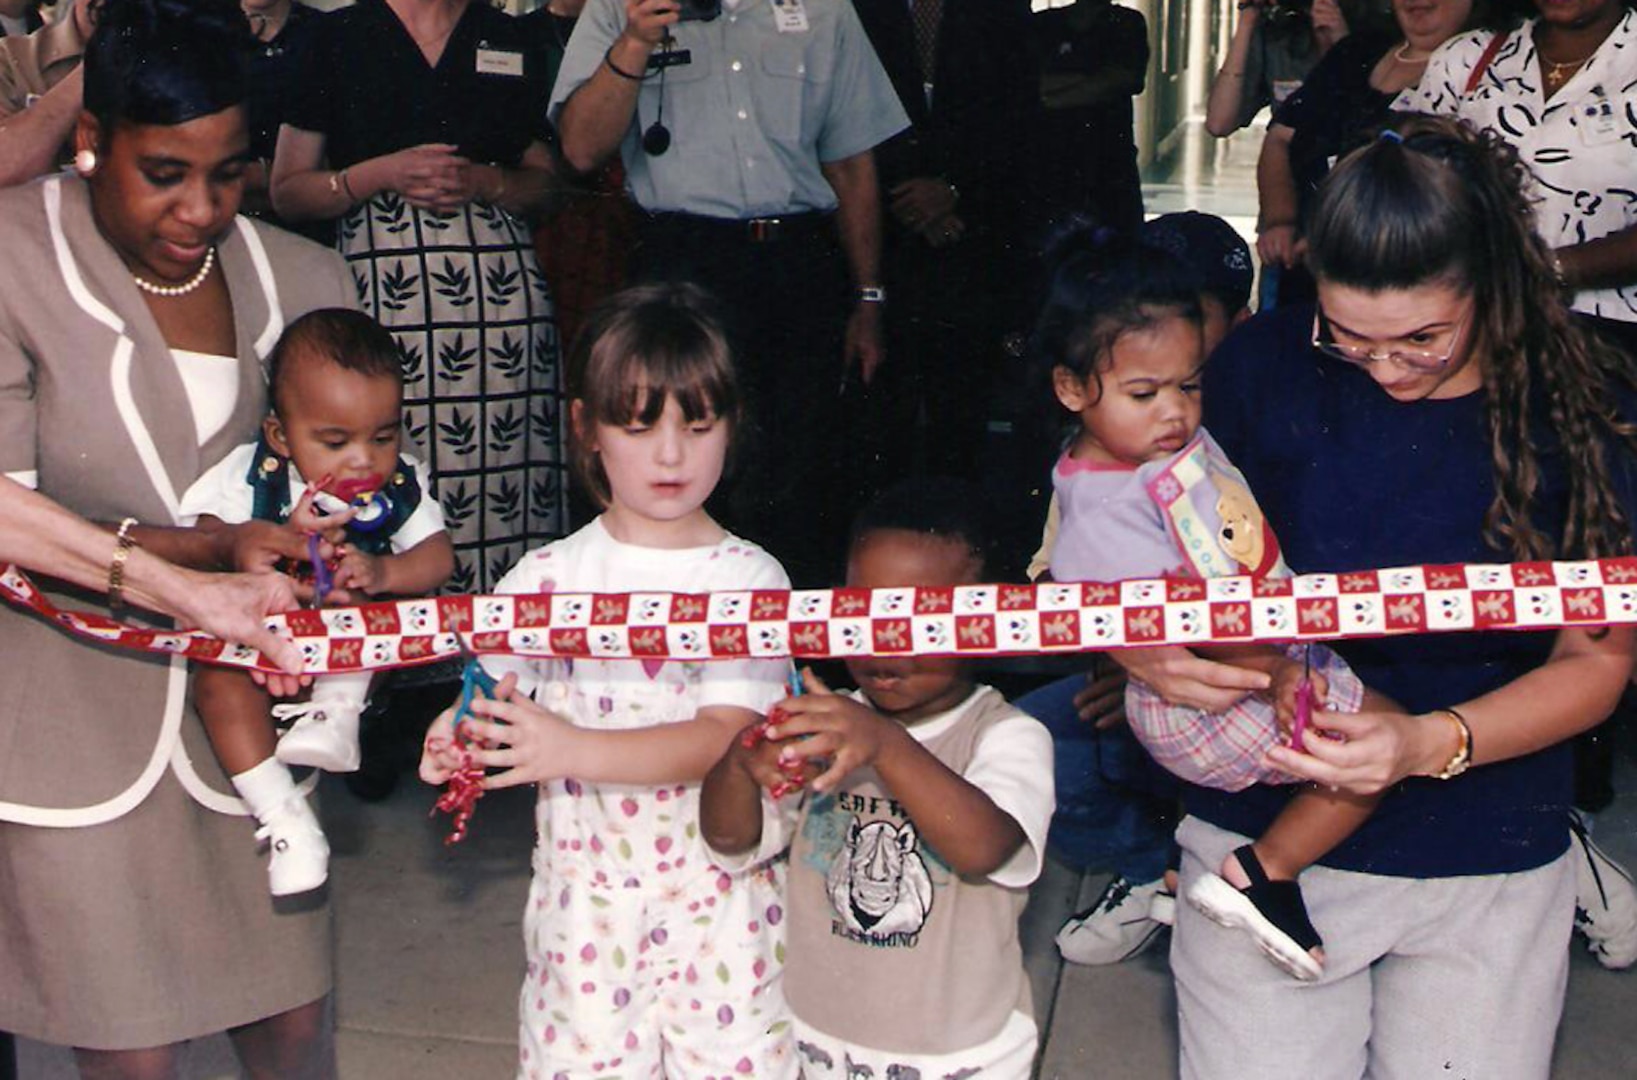 Five-year-old Amanda Shaw (center) helps cut the ribbon at the grand opening of the Defense Logistics Agency’s Child Development Center in August 1998. Amanda, the daughter of DLA Finance employee Joe Shaw, and her younger sister Megan were some of the first enrollees at the center.